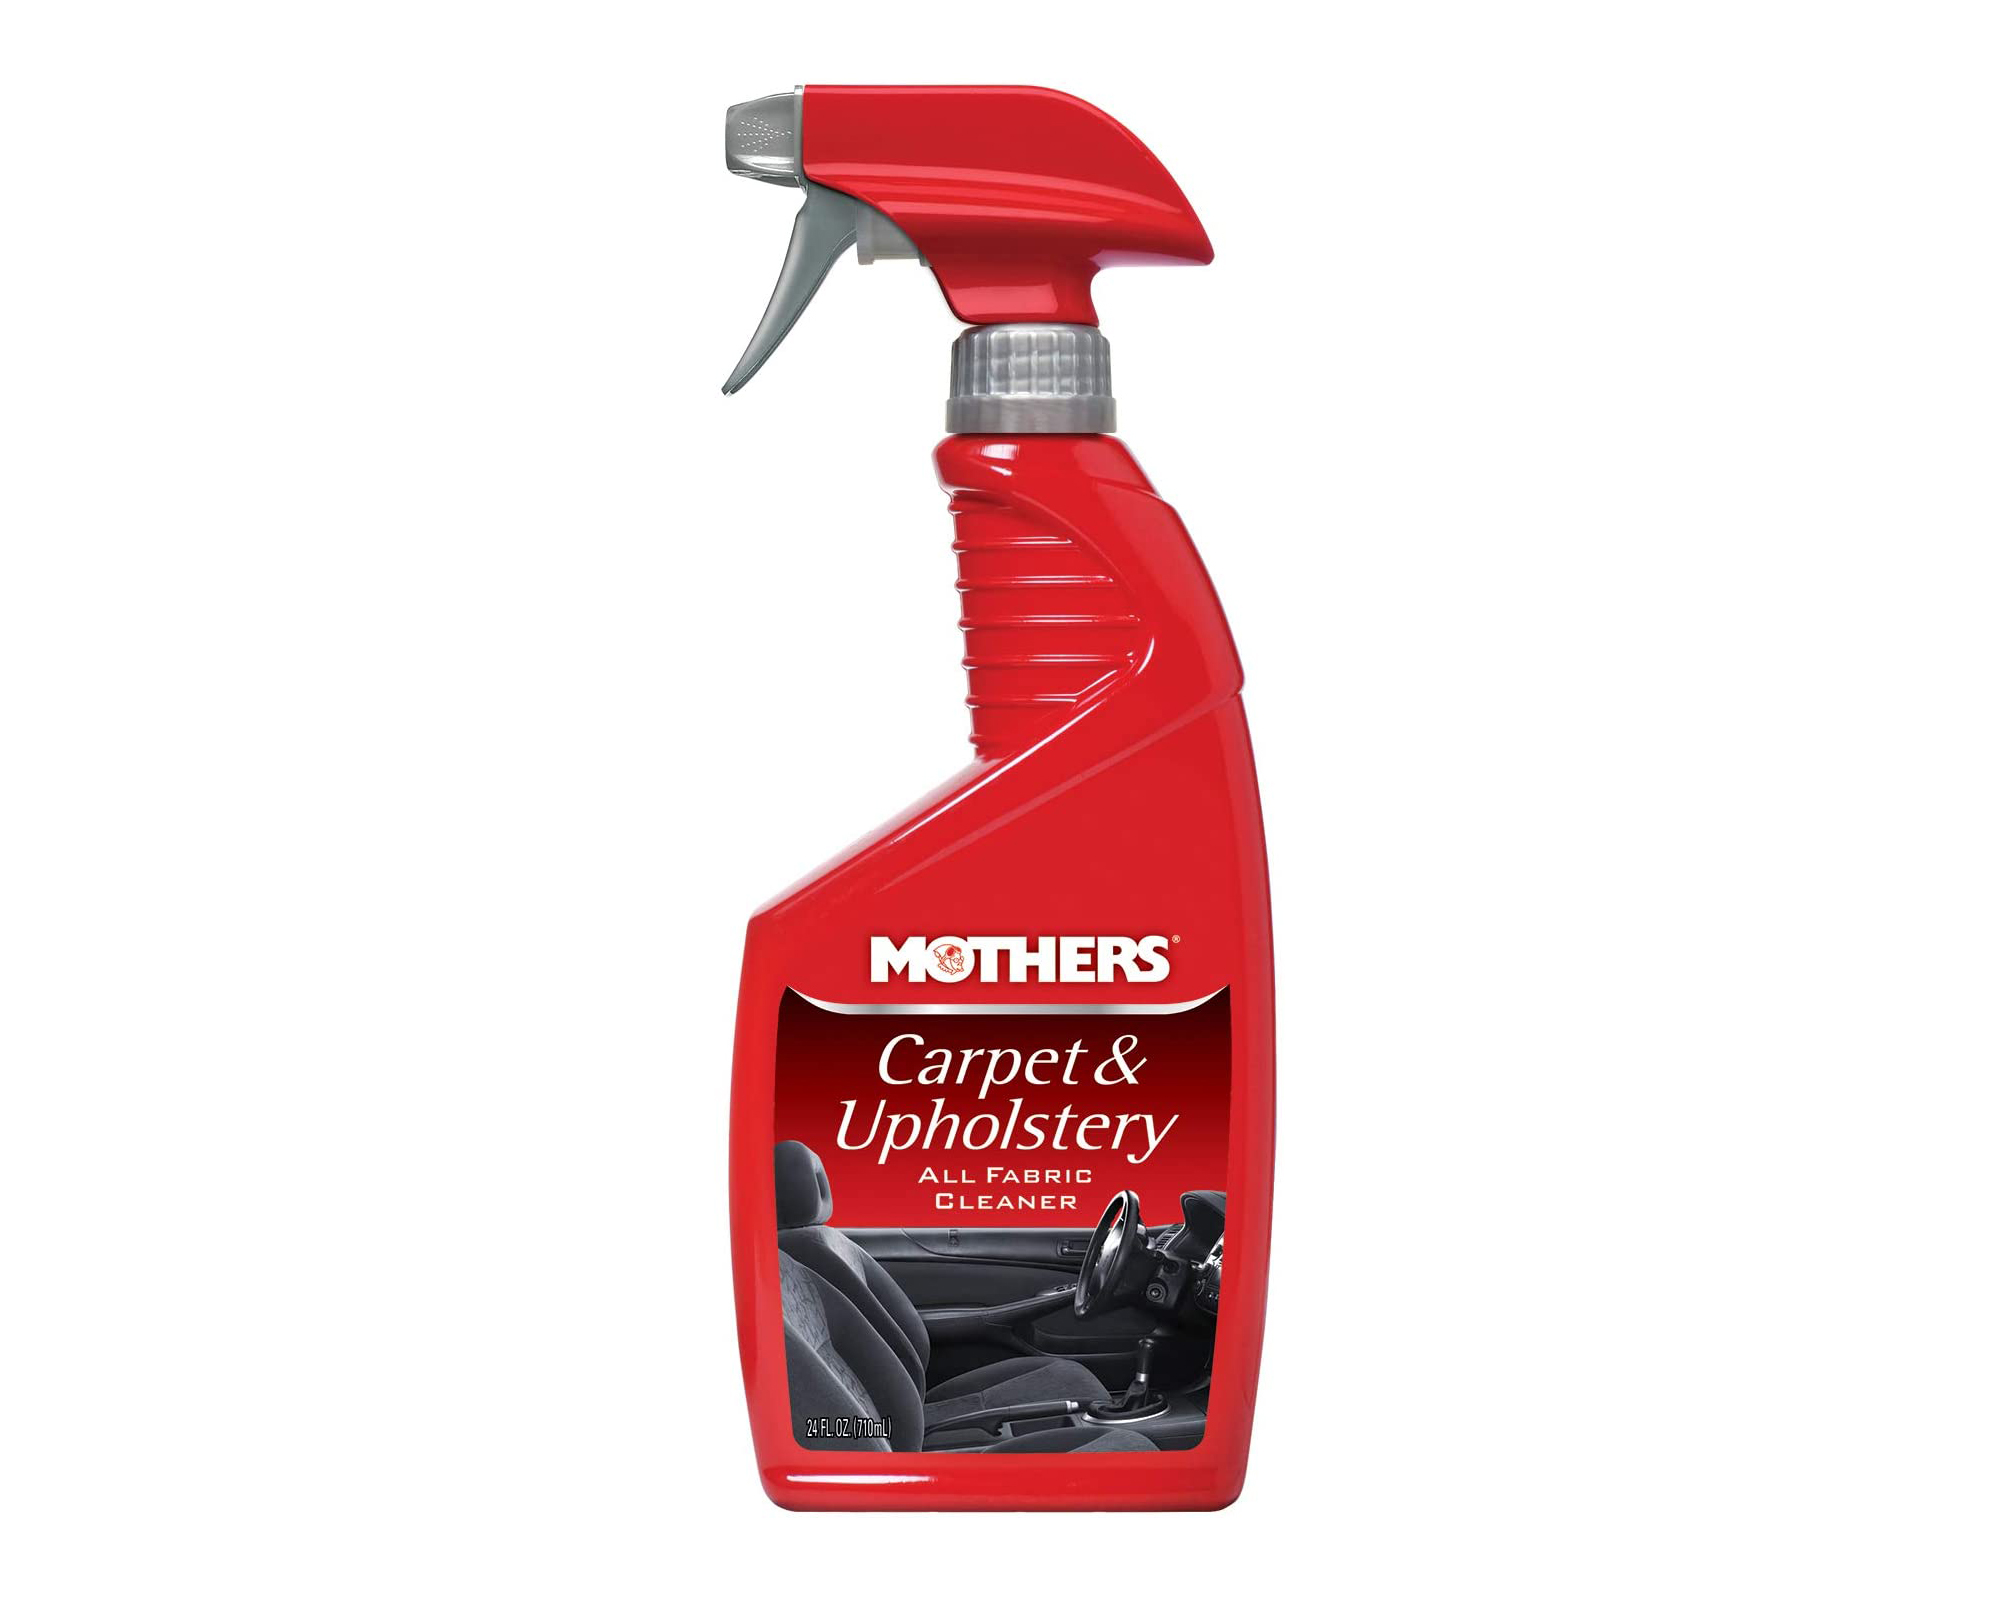 Best upholstery cleaner: Image of Mother's upholstery cleaner